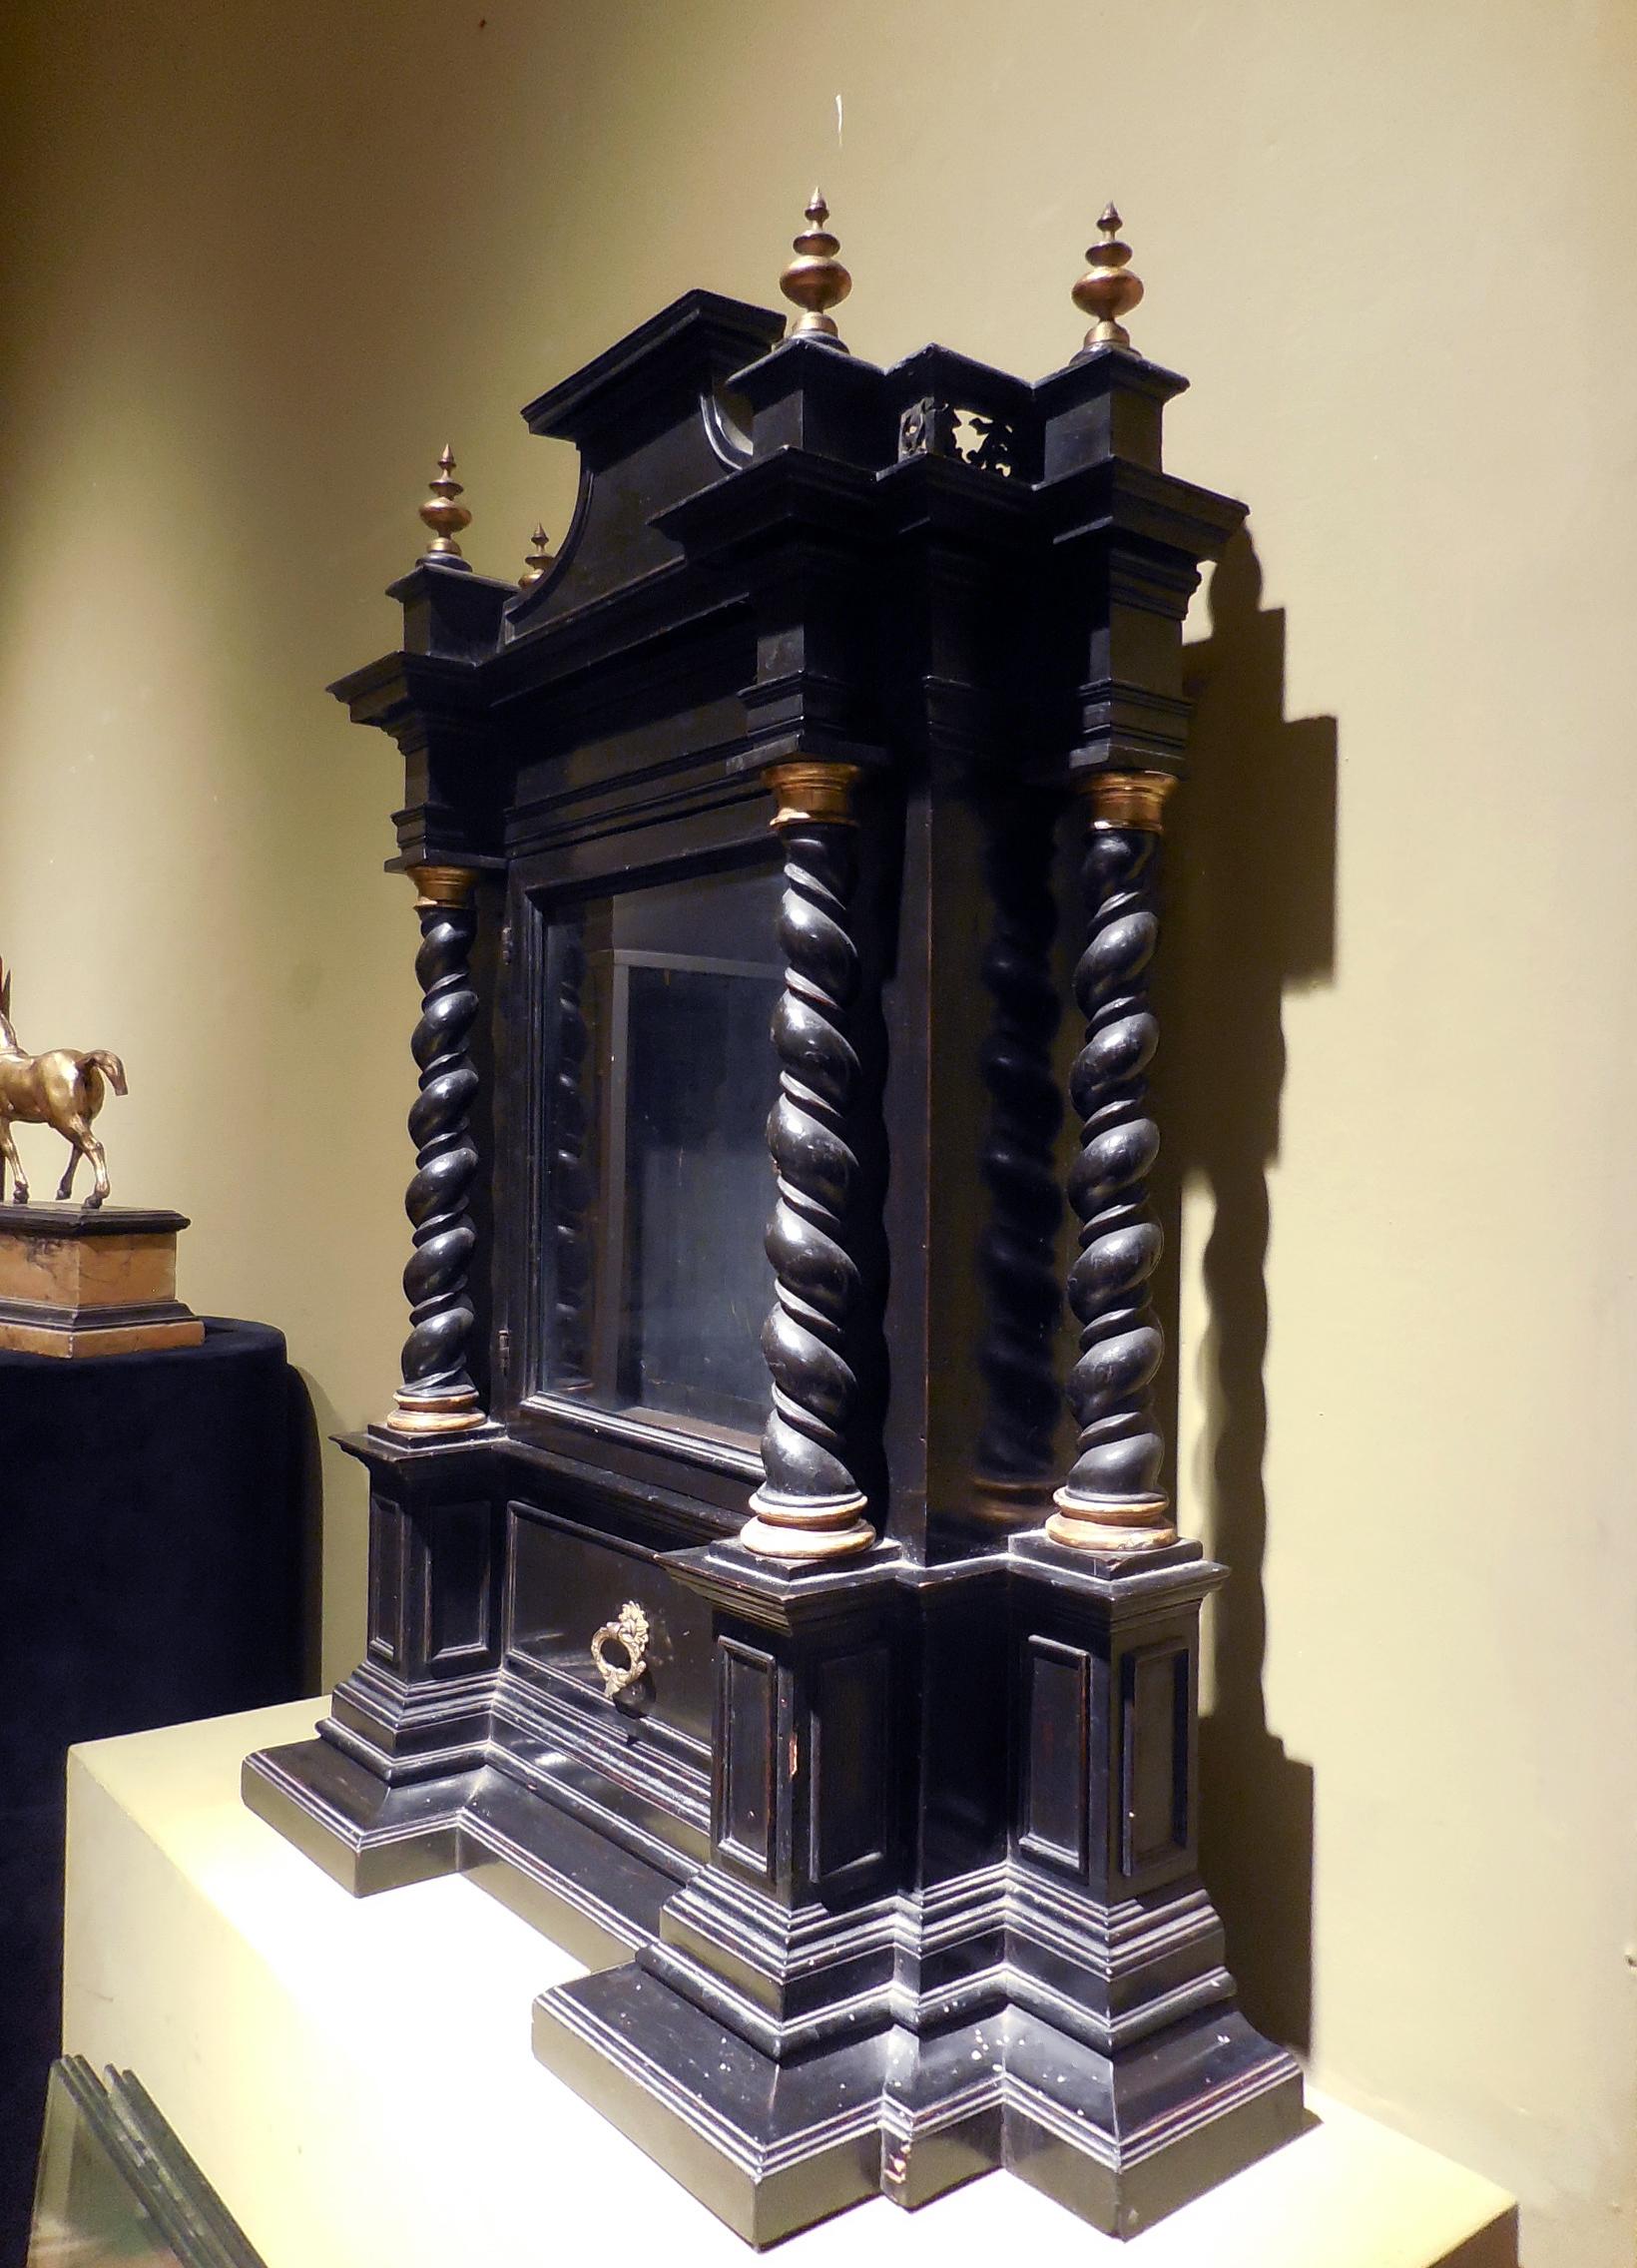 An early 18th century Florentine ebonized wood aedicule case with gilt metal embellishments

Ambit of Leonard van der Vinne
Possibly first decade of the 18th century; Florence, Italy
Approximate size: 83.5 (h) x 69 (w) x 23 (d) cm

The cabinet’s